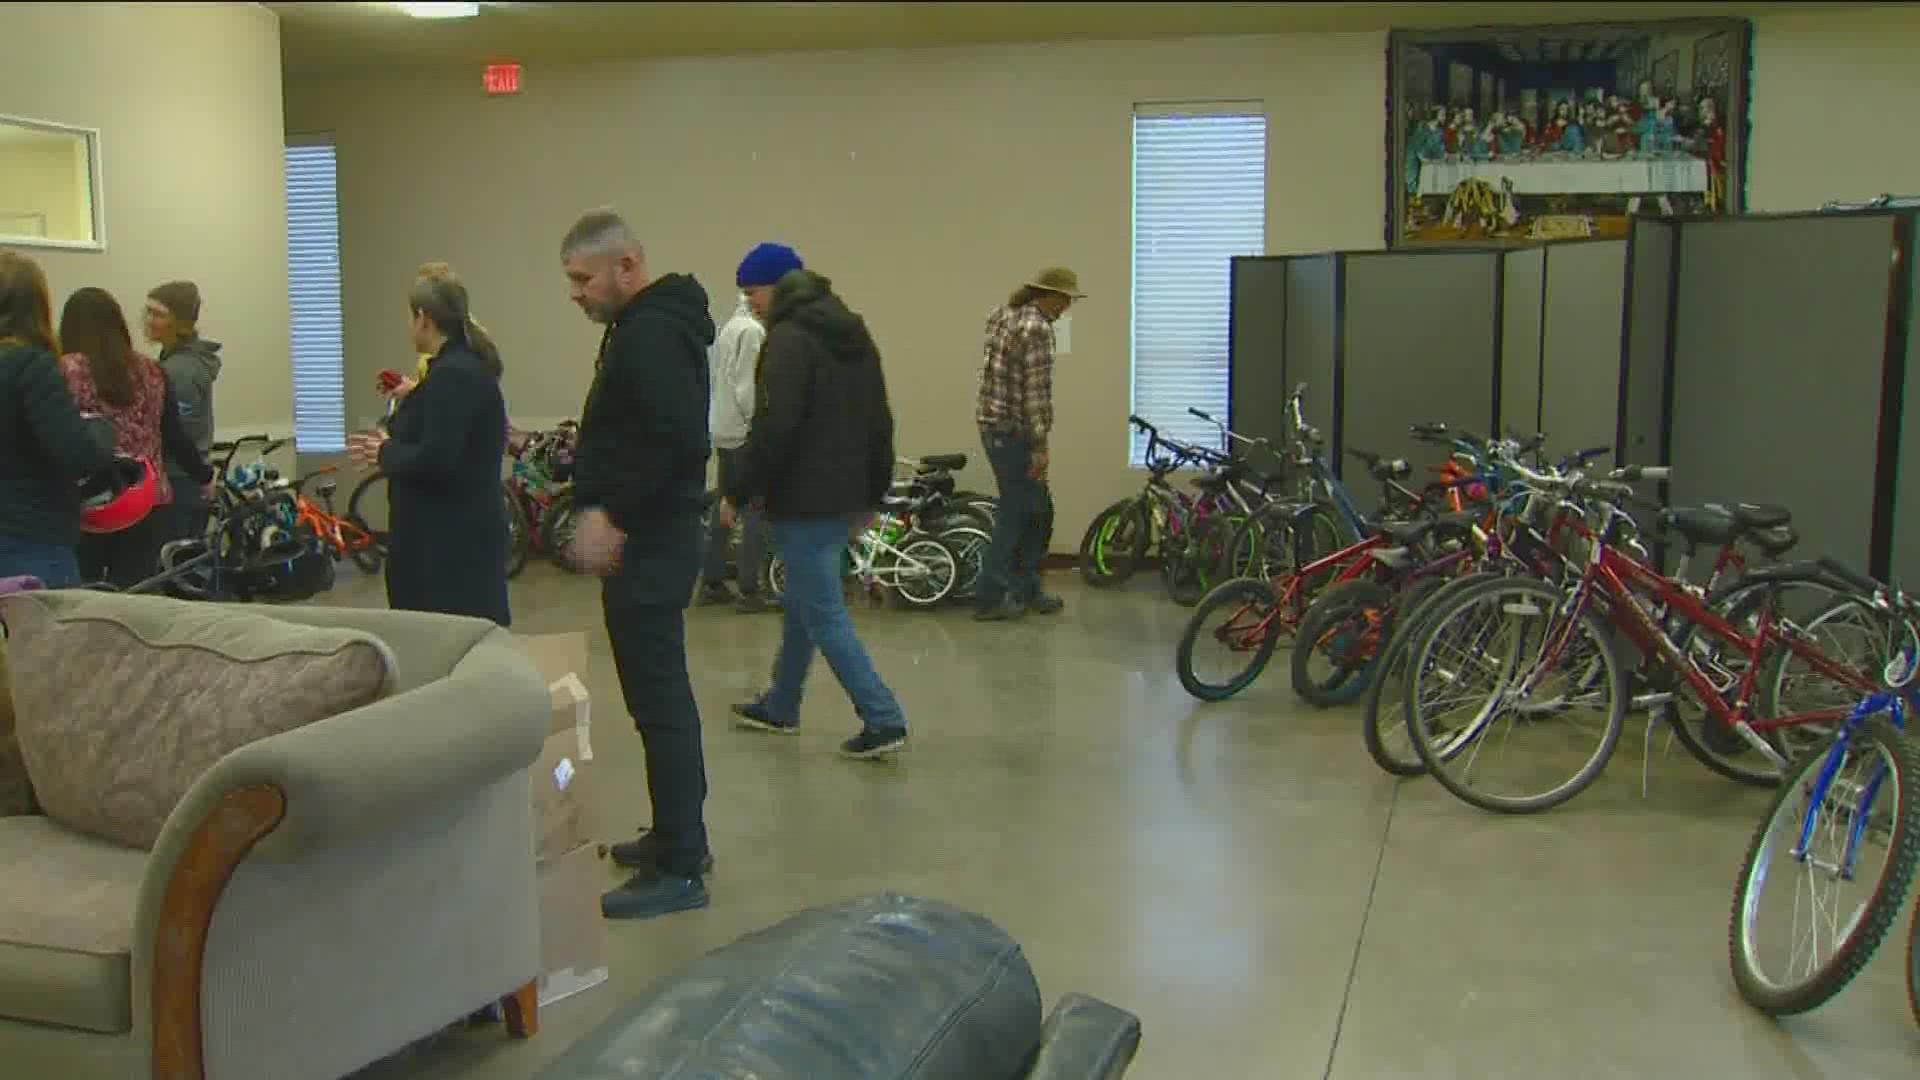 Many refugees have come to Idaho, but need better transportation.